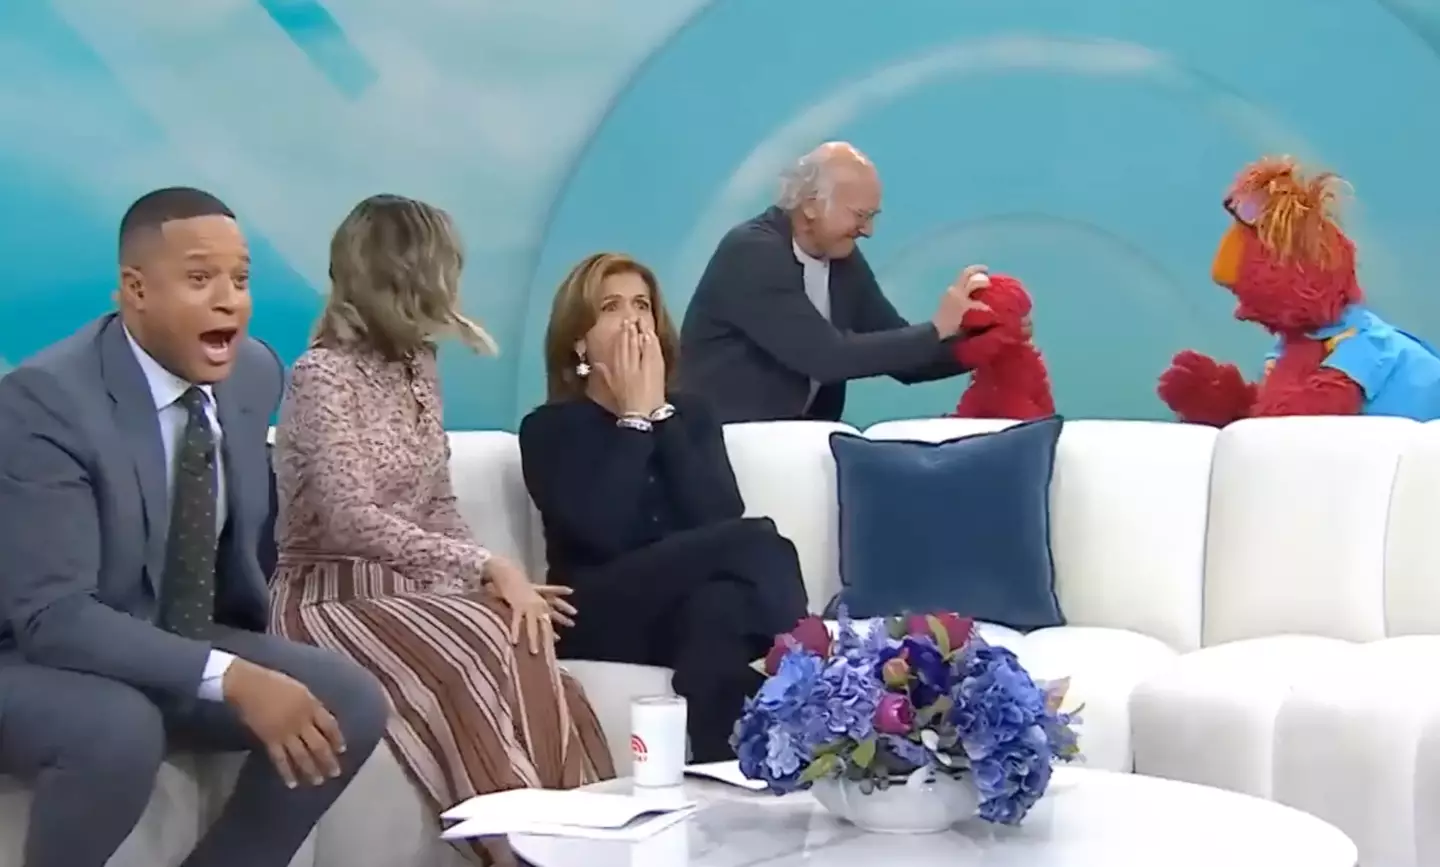 The Today show hosts were stunned at the attack.